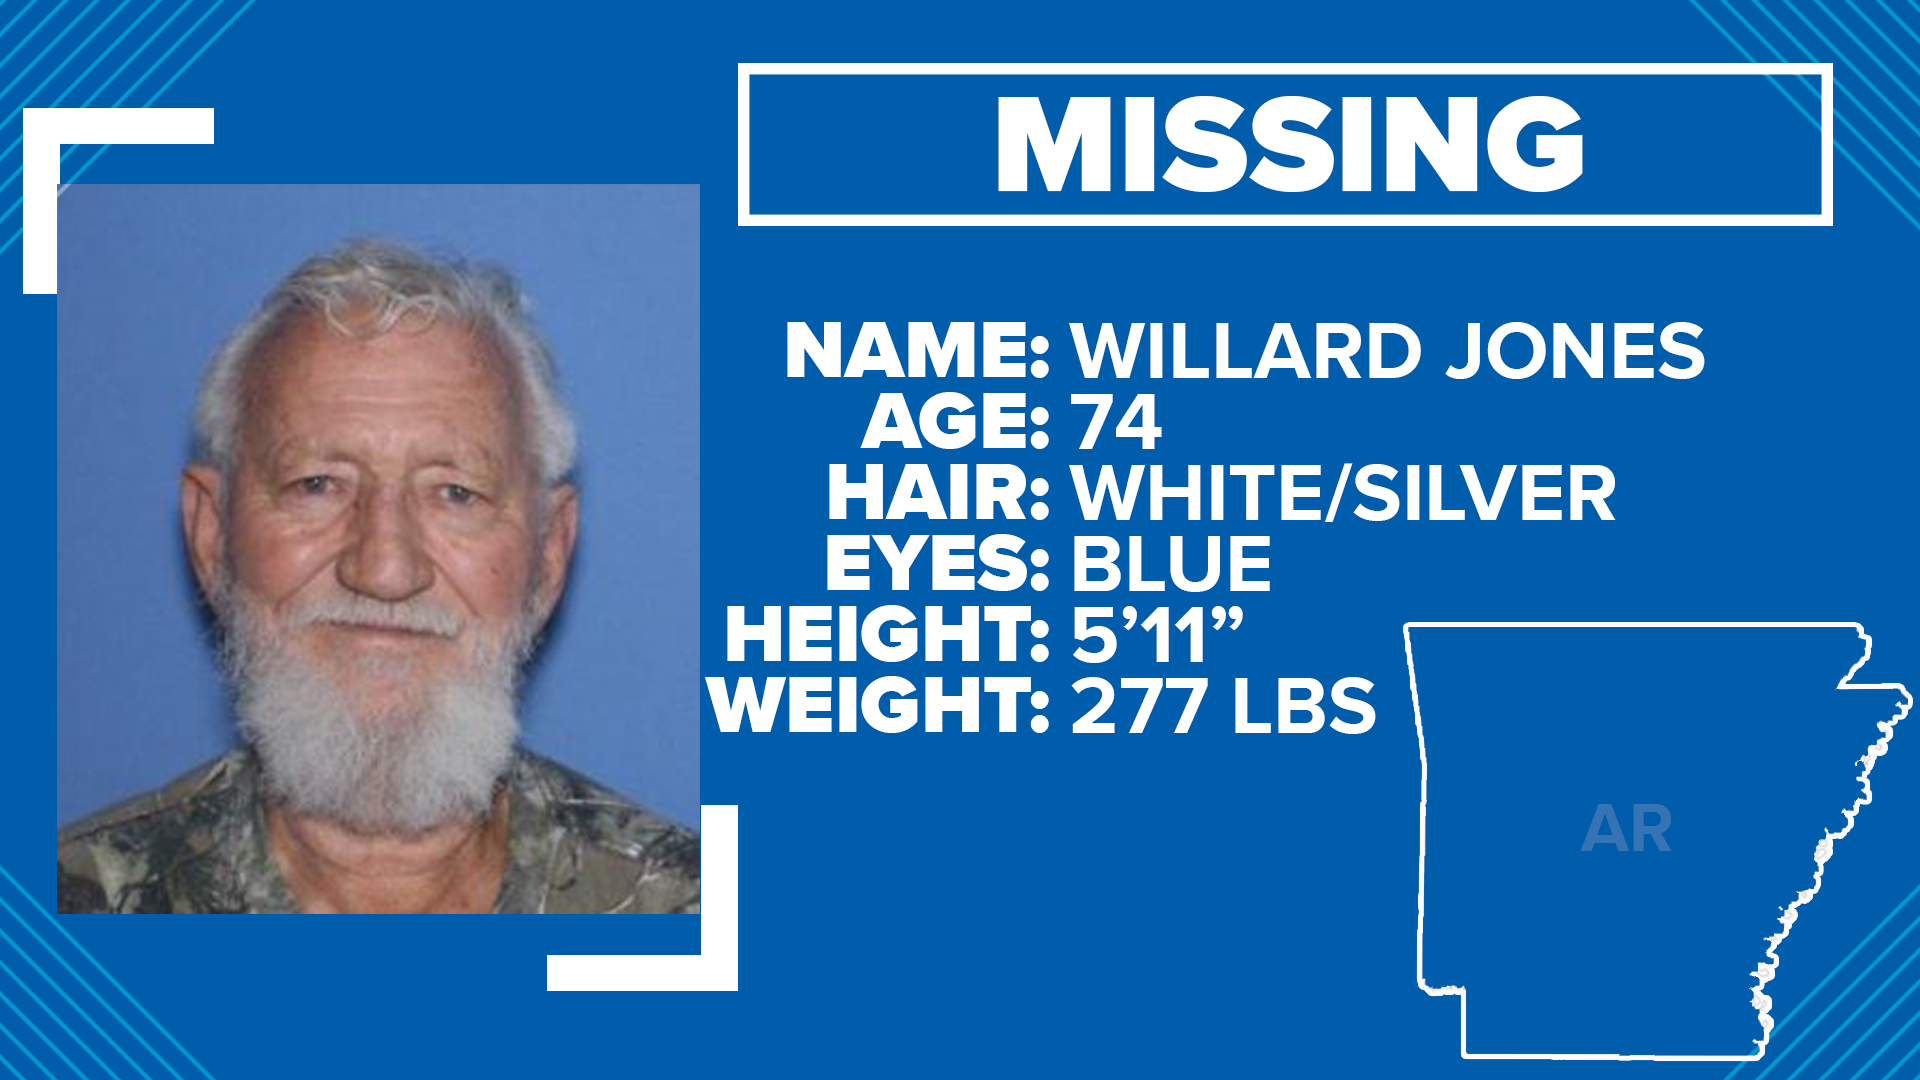 The Newport Police Department and Arkansas State Police have activated a Silver Alert in hopes of finding 74-year-old Willard Jones.